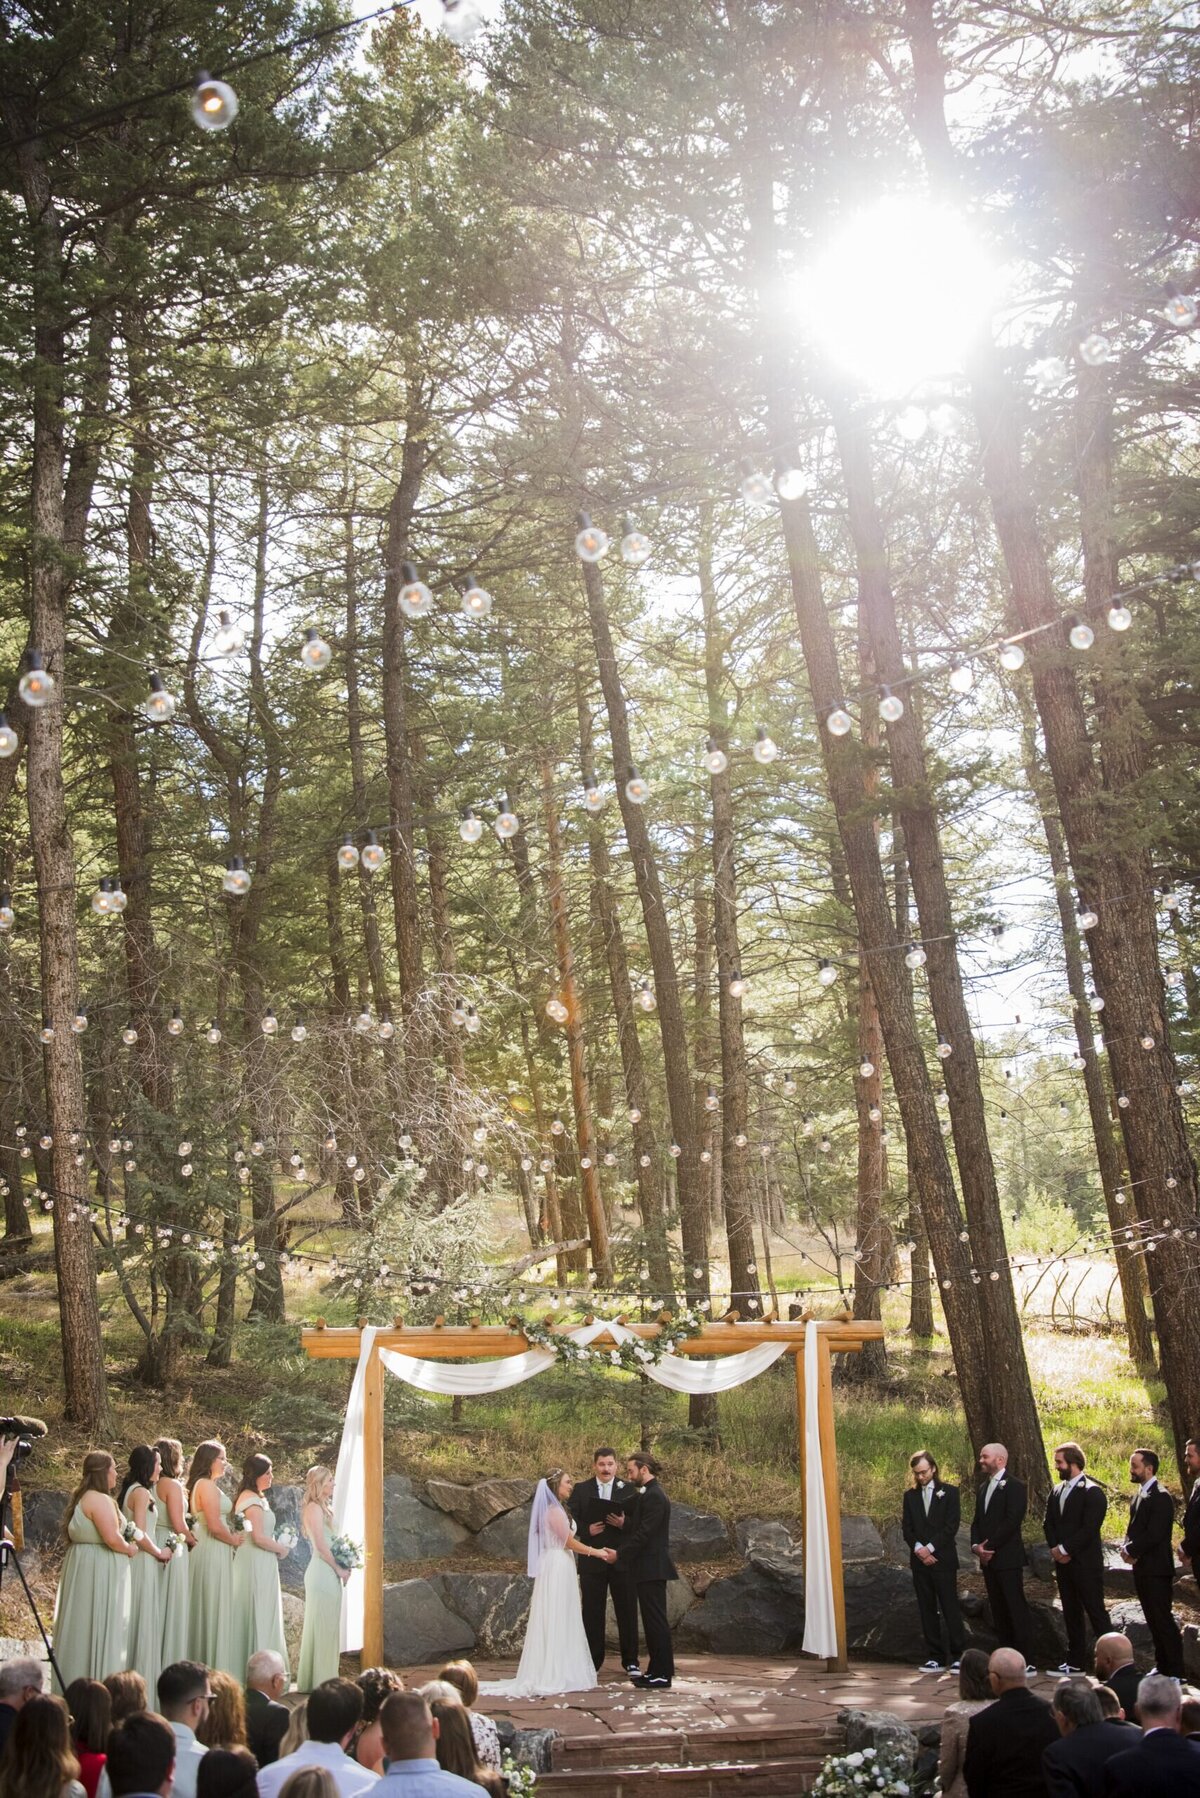 A wide angle shot of a wedding ceremony at golden hour at The Pines at Genesee.